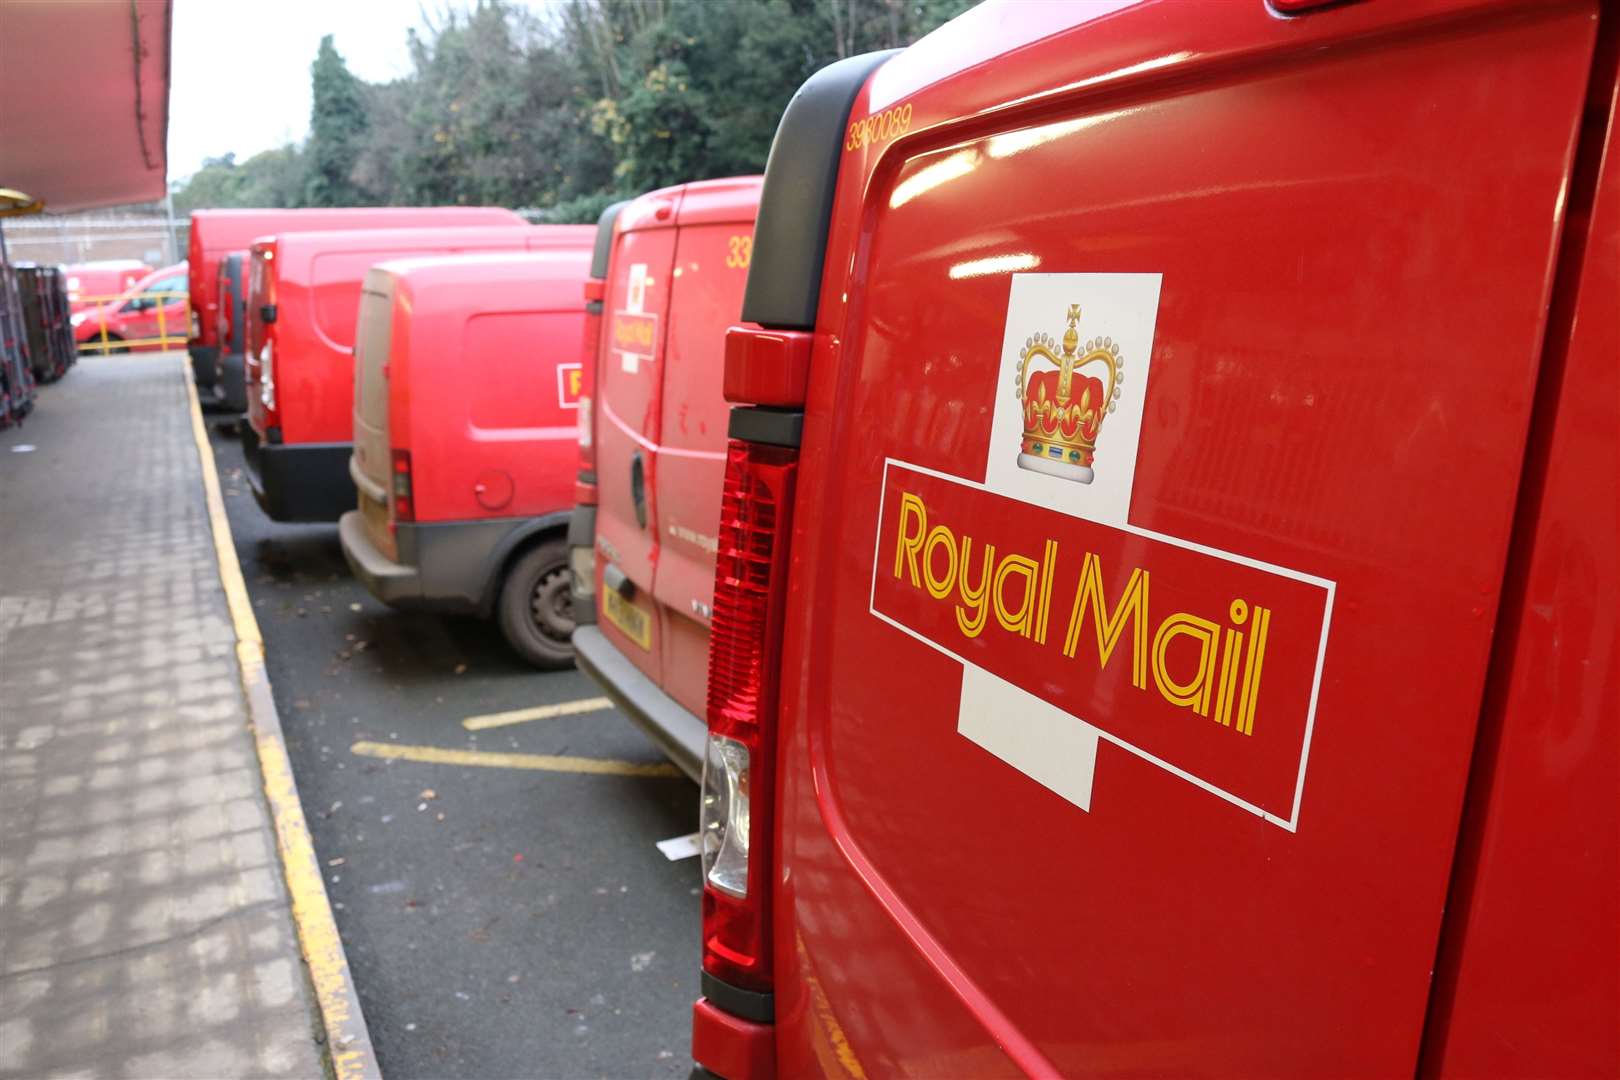 164 million parcels were handled by Royal Mail in the December trading period last year